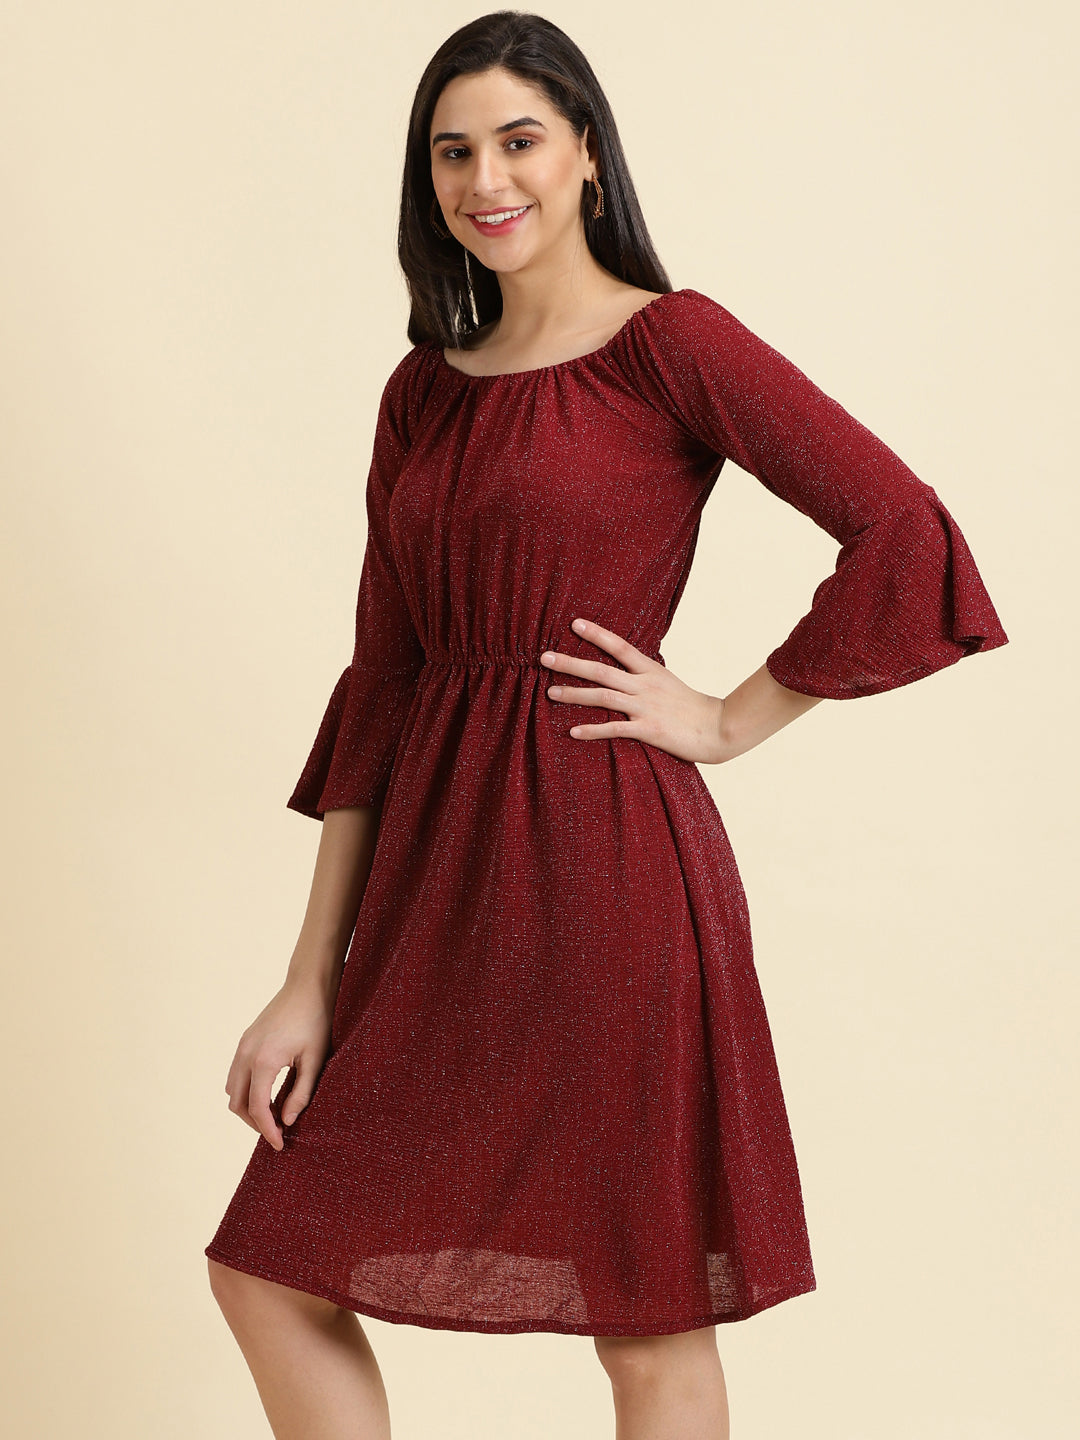 Women's Maroon Embellished Fit and Flare Dress